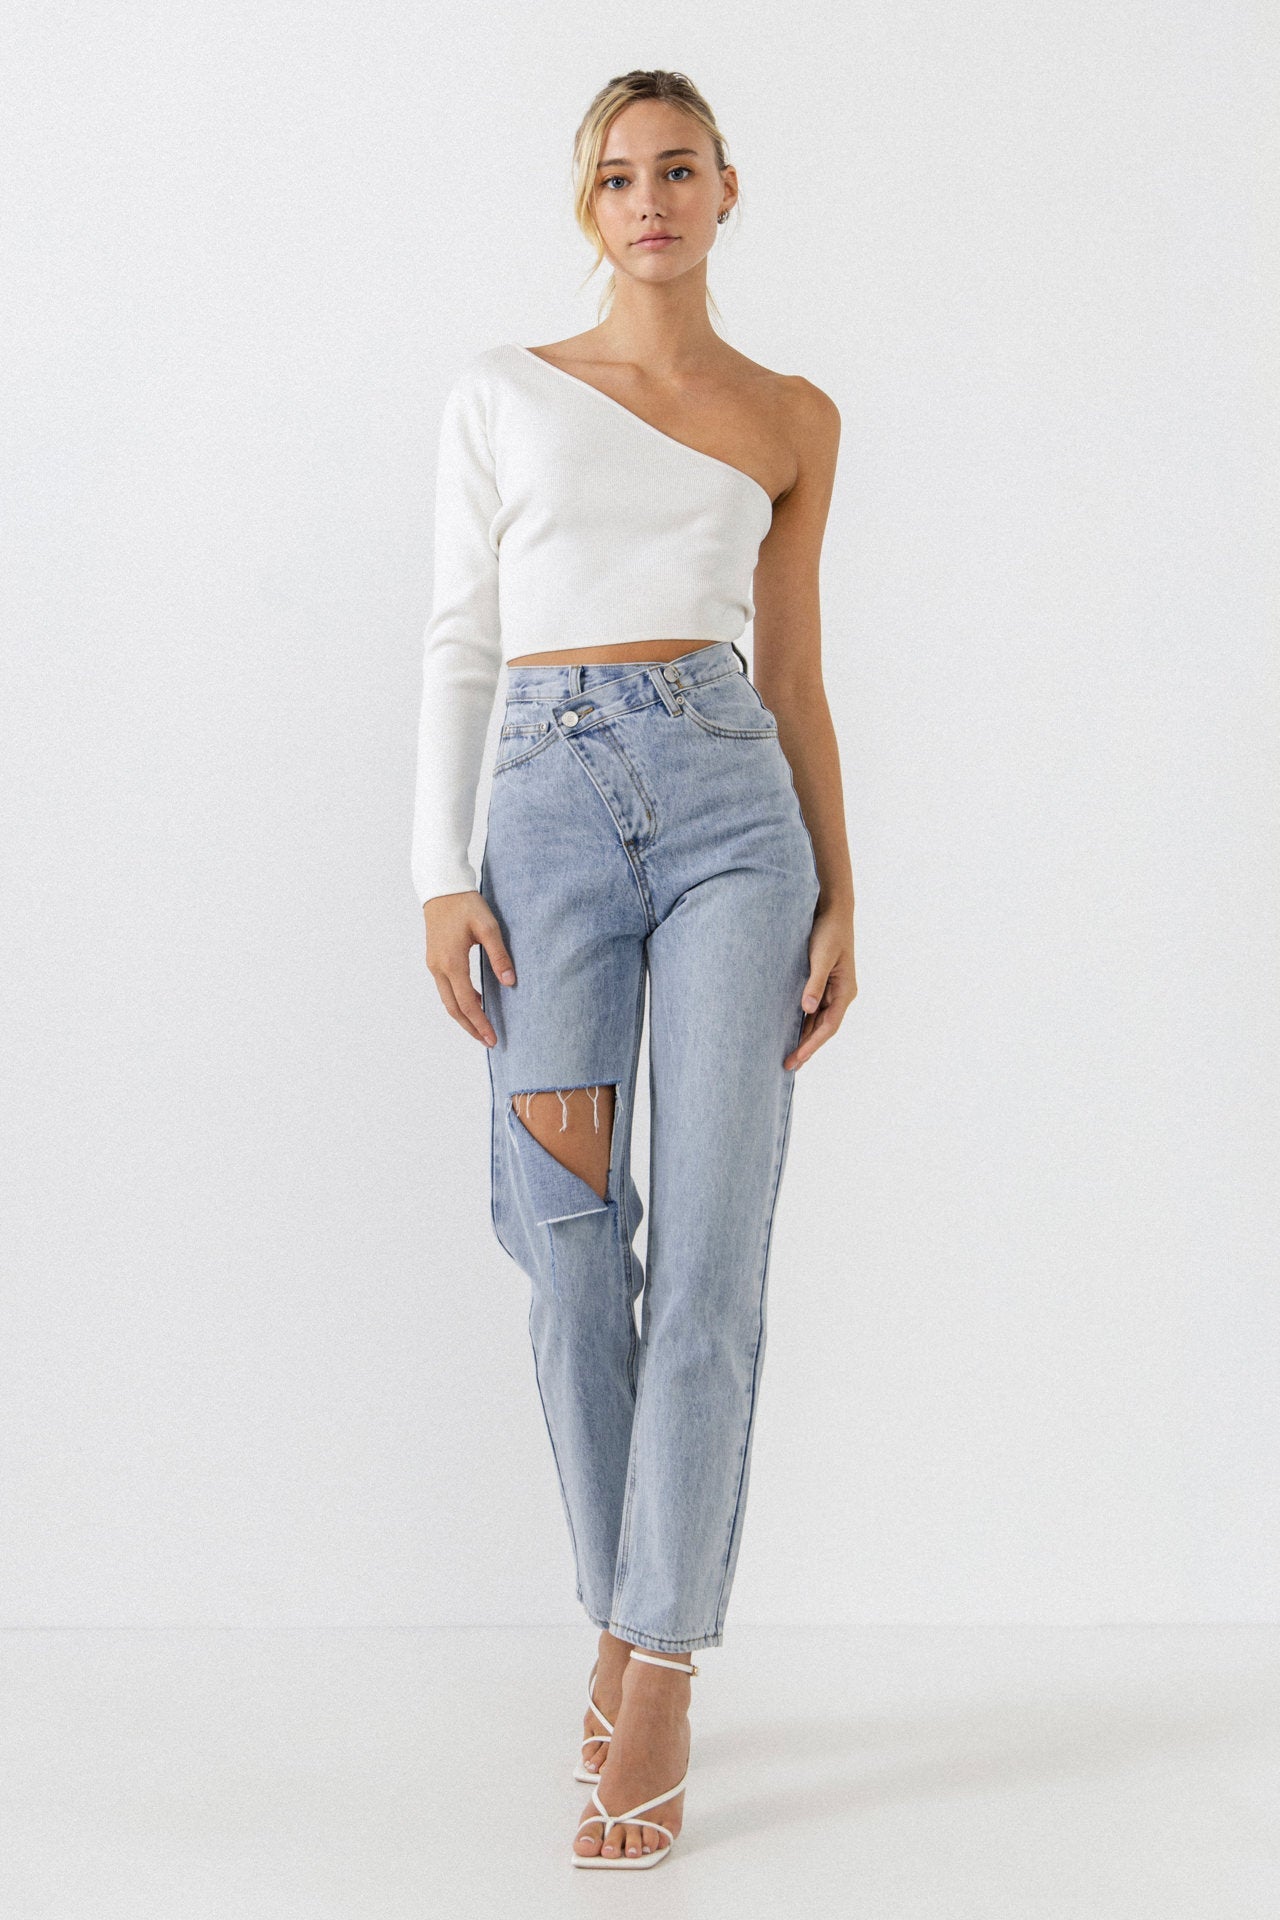 GREY LAB-Asymmetric Wrap Jeans-JEANS available at Objectrare